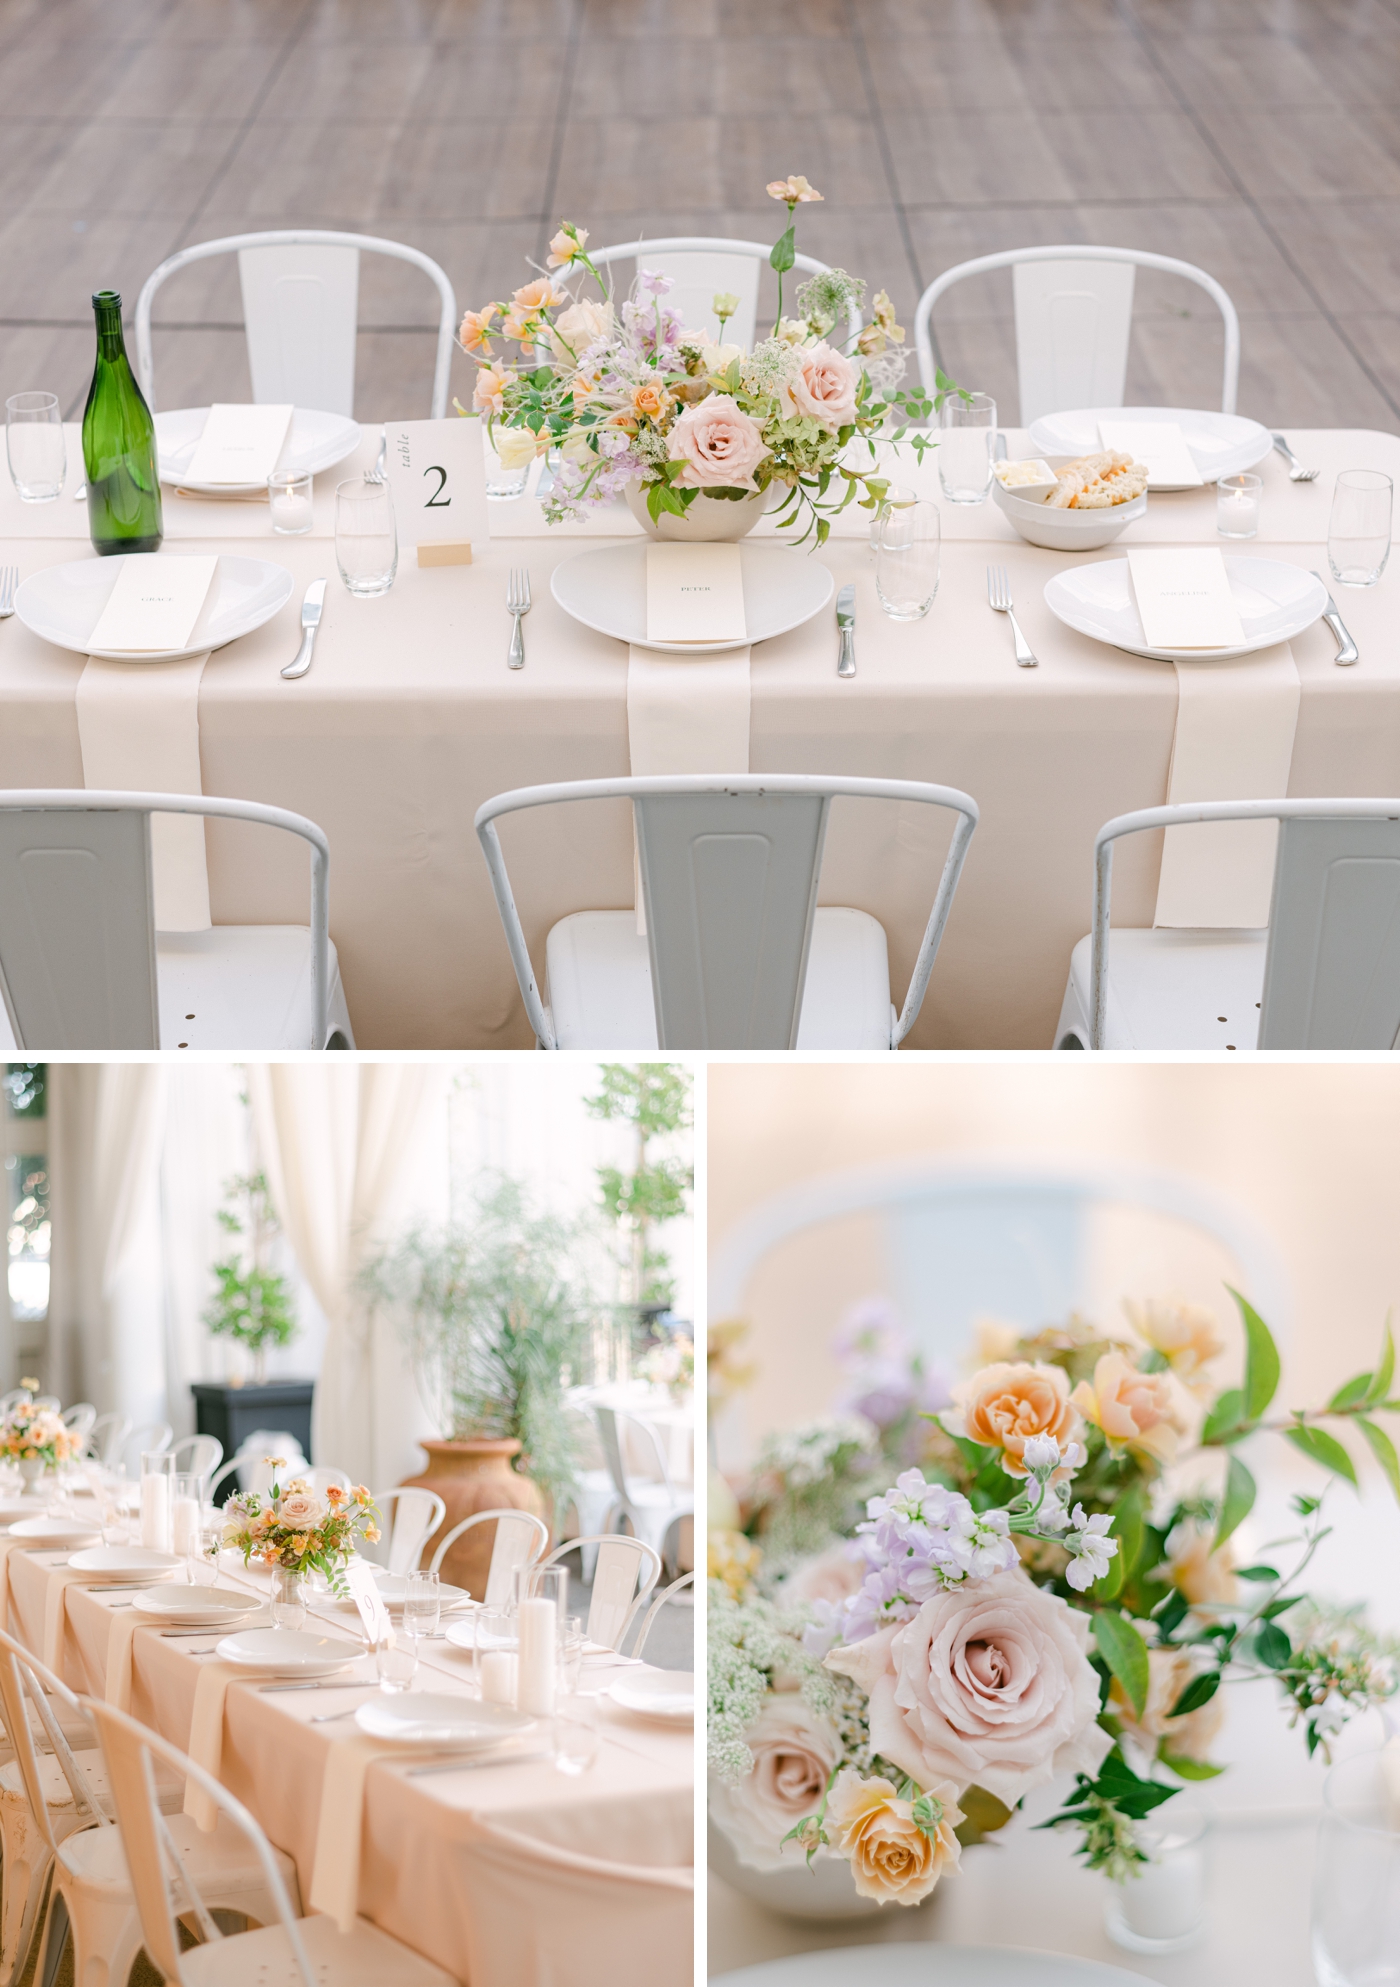 Cafe lights and white table linens for a summer wedding reception